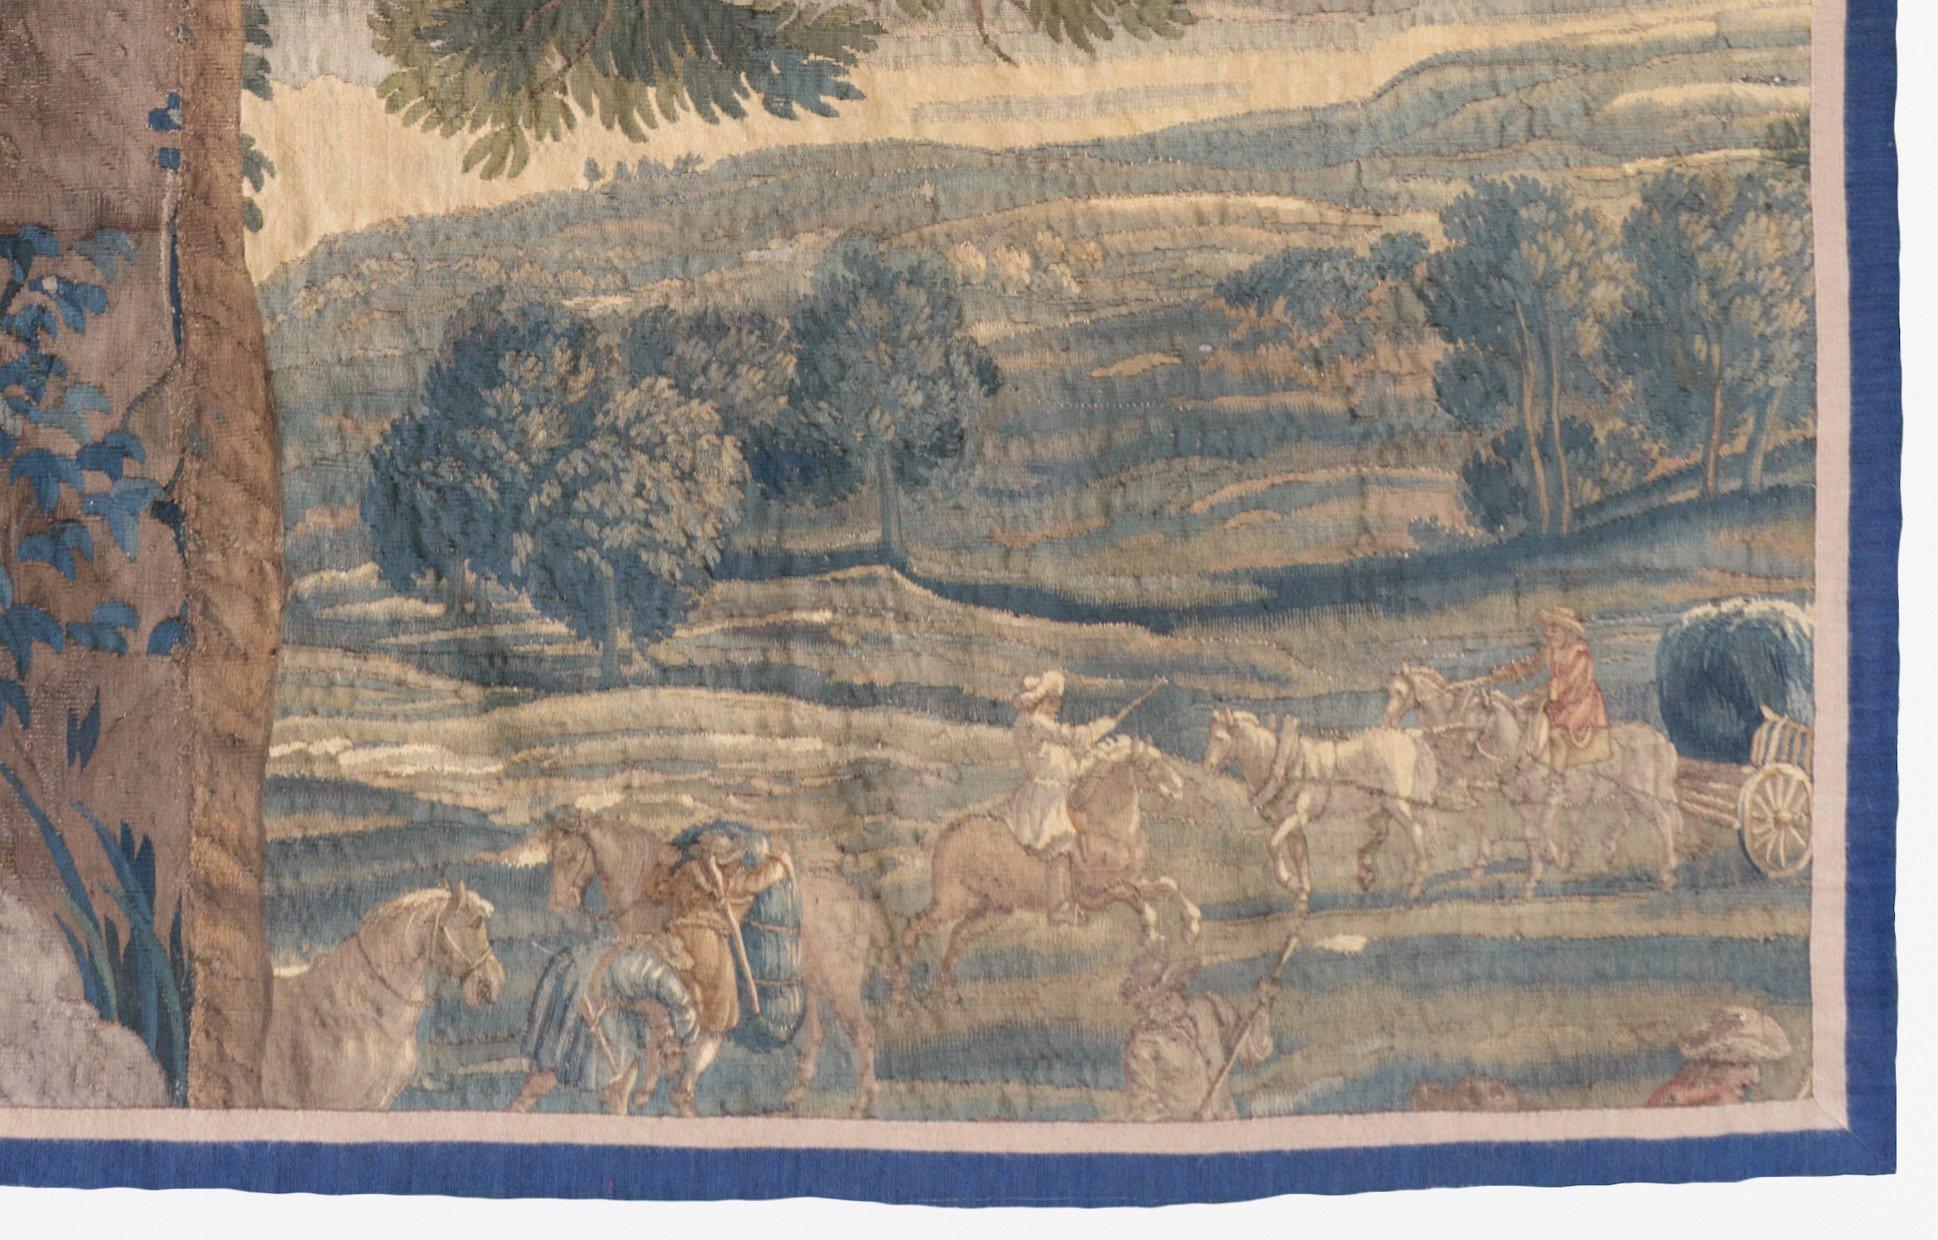 Antique 17th century Flemish verdure landscape tapestry depicting a lovely countryside with lush trees and vegetation, rolling hills, figures, horses and covered wagons. Please note that it does not have its original border and has been reduced from